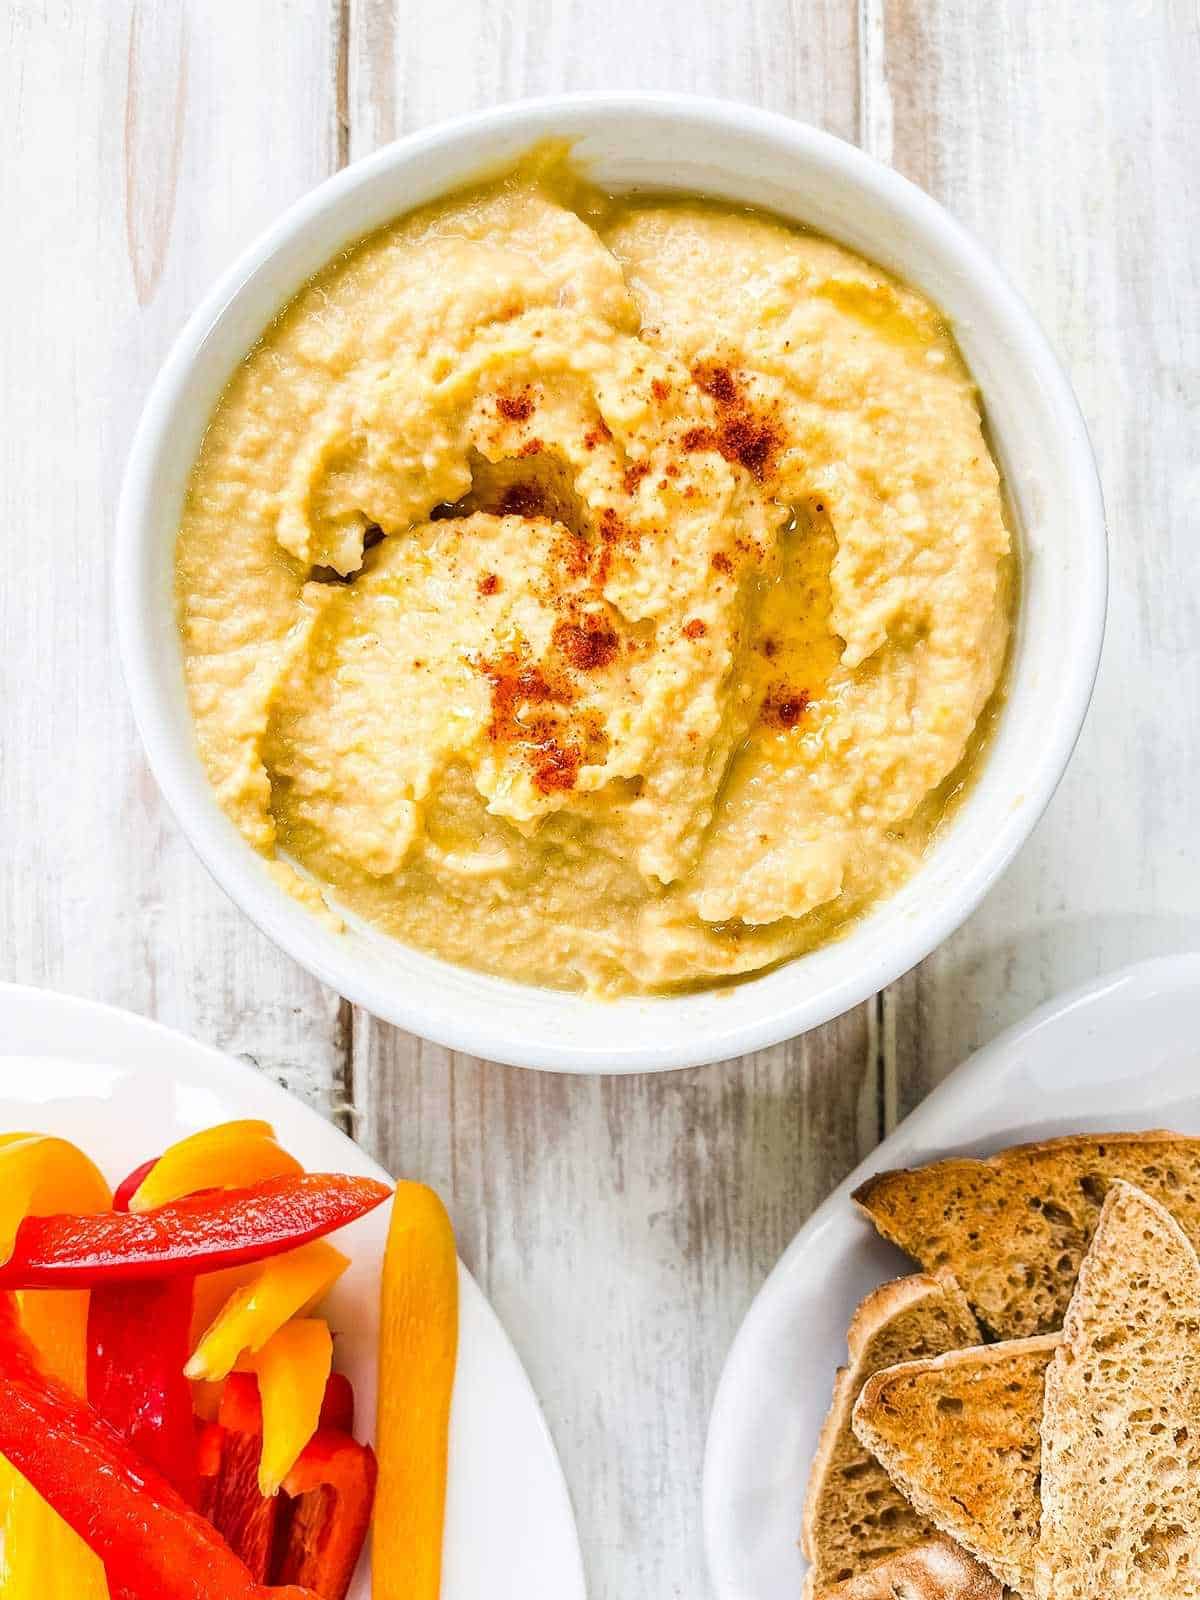 A bowl of Weight Watchers hummus with a plate of sliced pepper and some toasted bread.